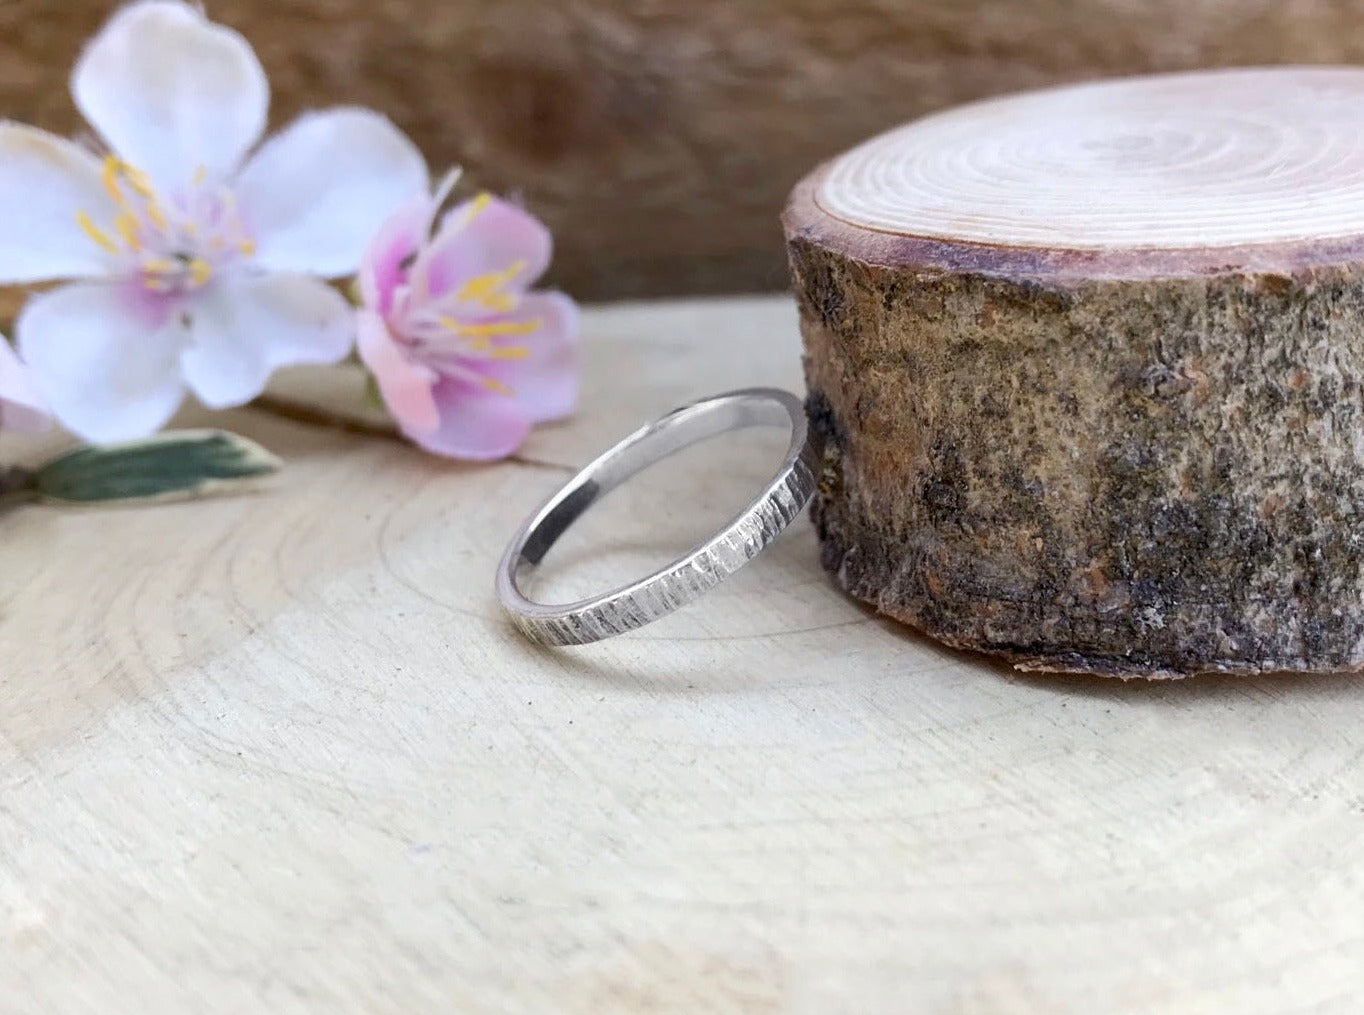 Silver Narrow Tree Bark Ring by Curious Magpie Jewellery